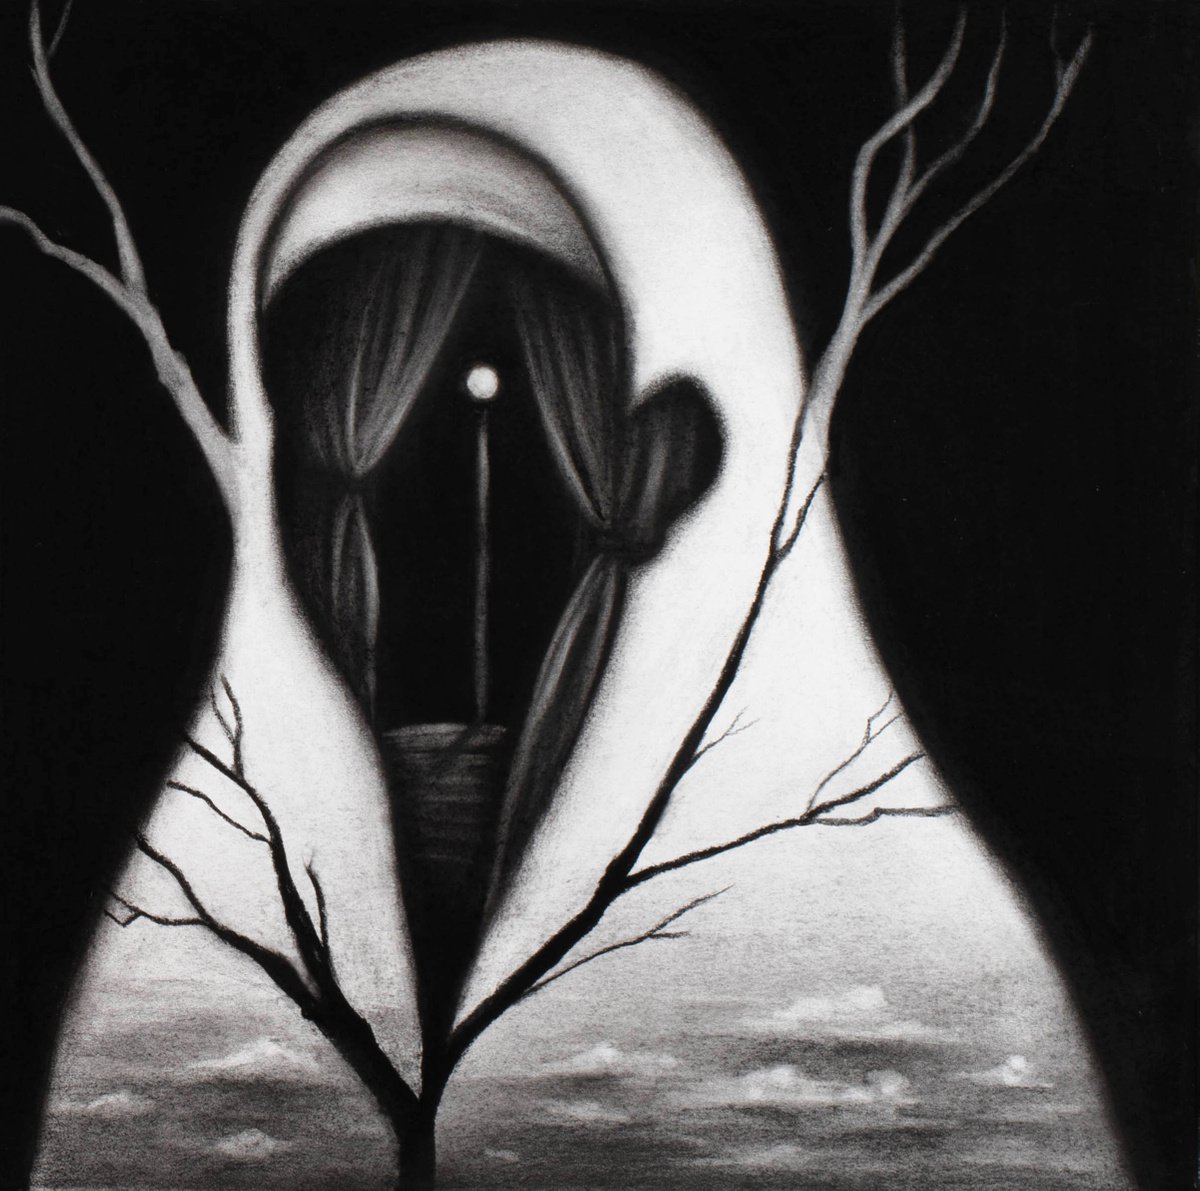 -The Two Mothers (Mater Tenebrarum) Diptych 1 of 2 by Alessio Radice